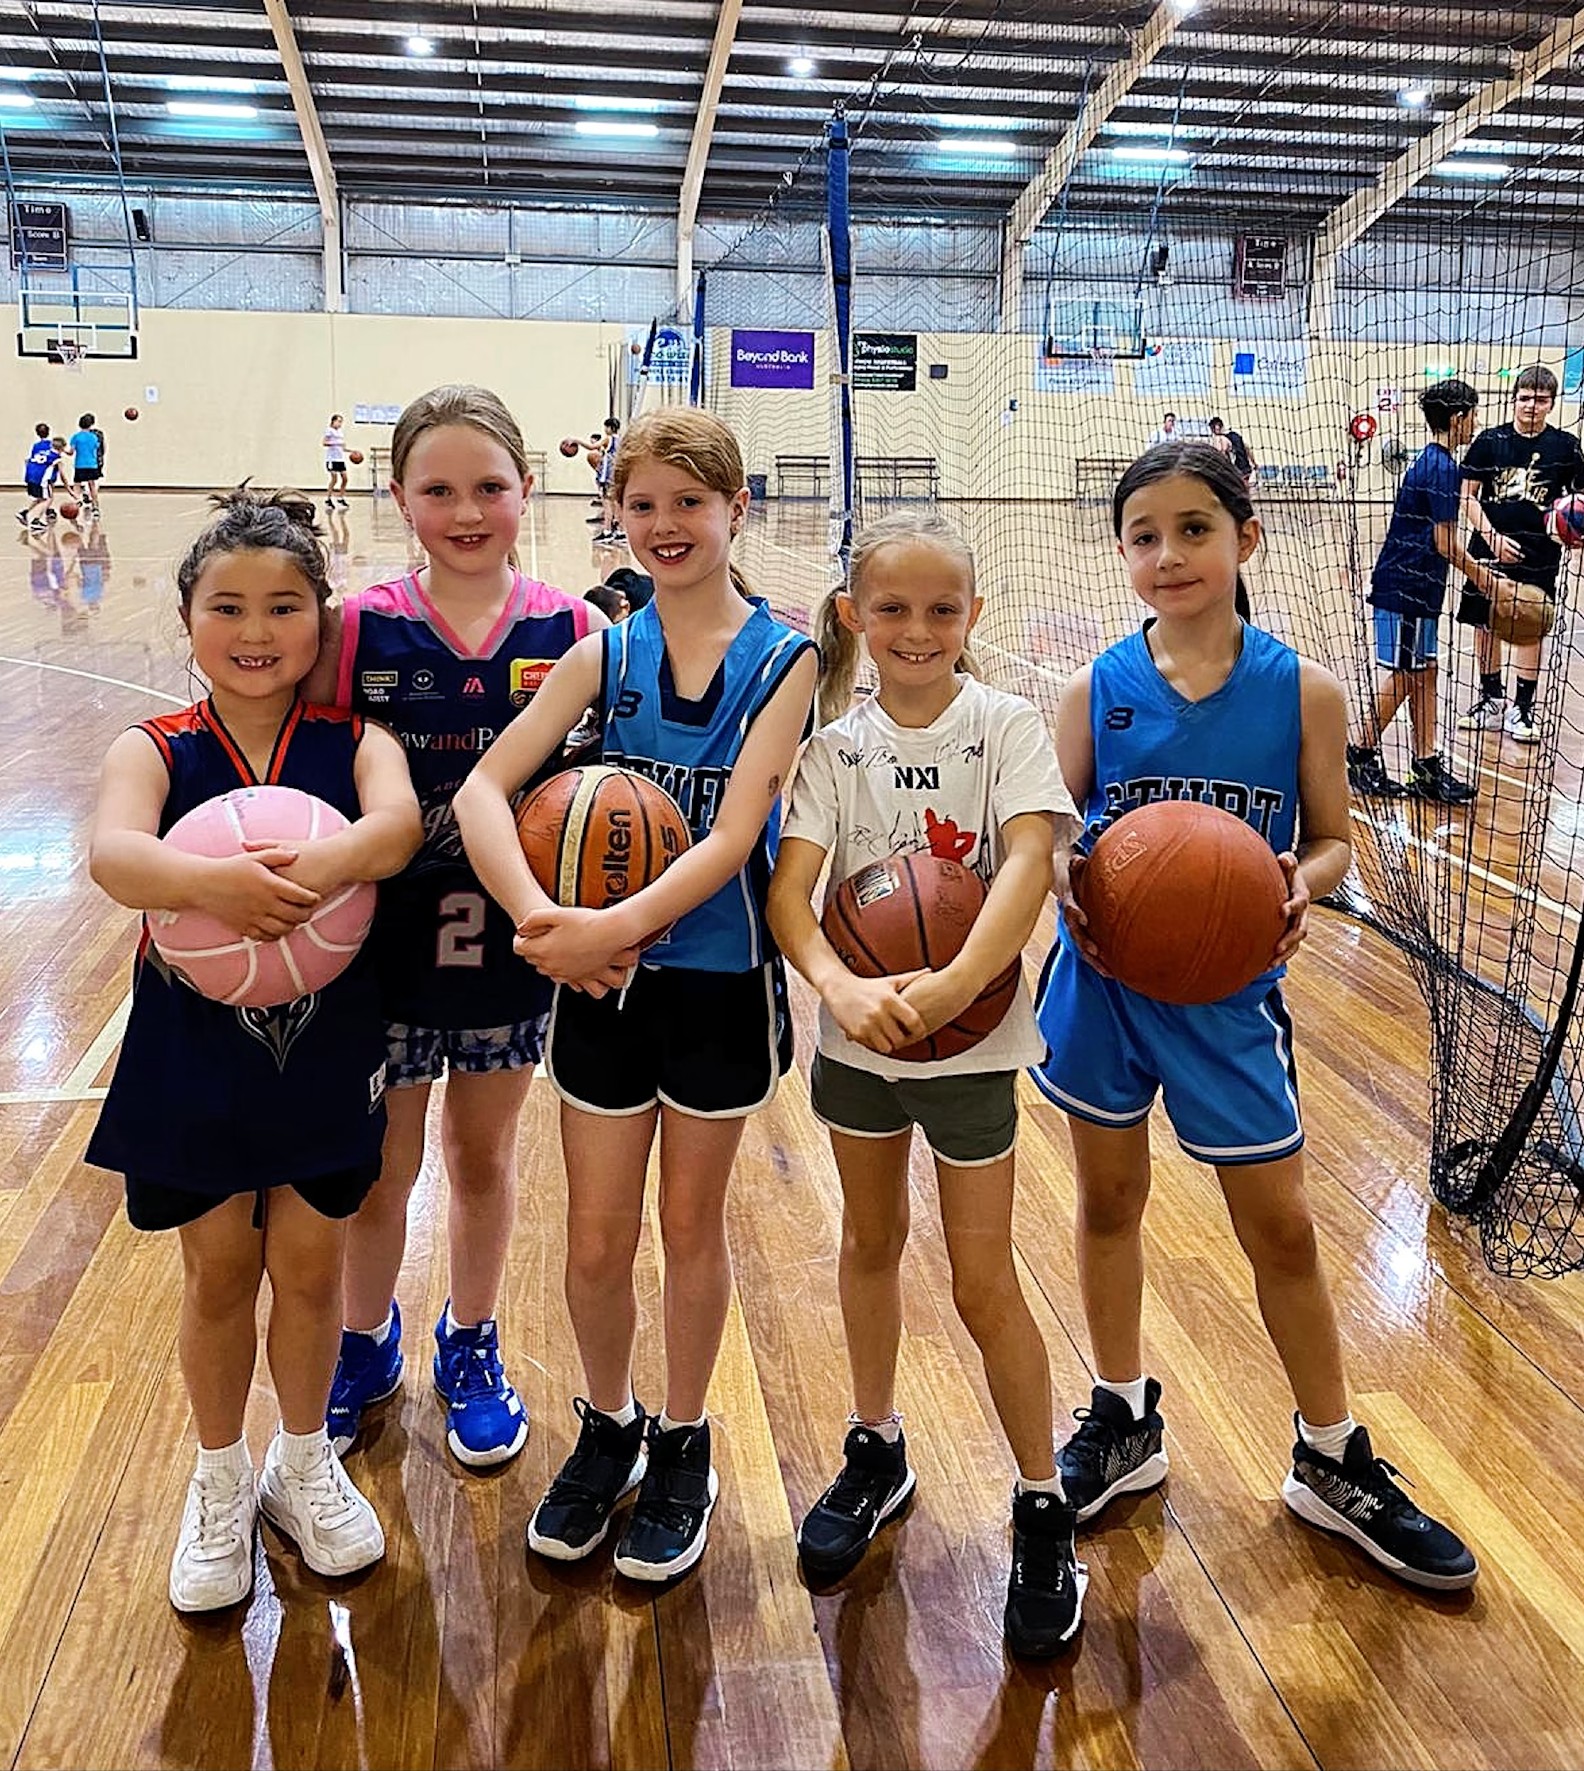 Adelaide 36ers school holiday training camp - theyll have a ball!